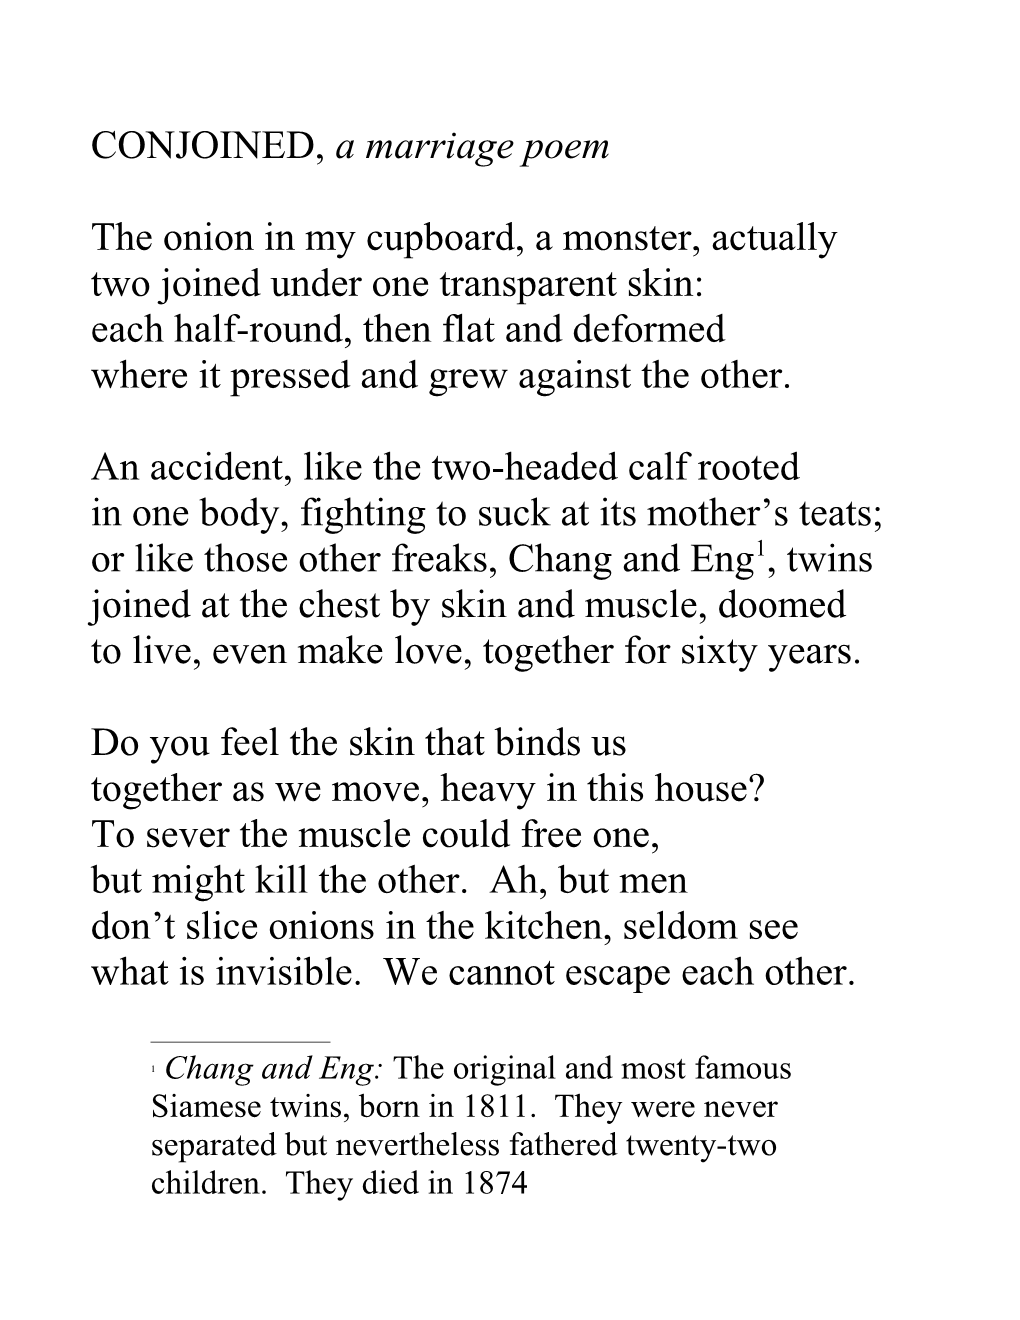 CONJOINED, a Marriage Poem